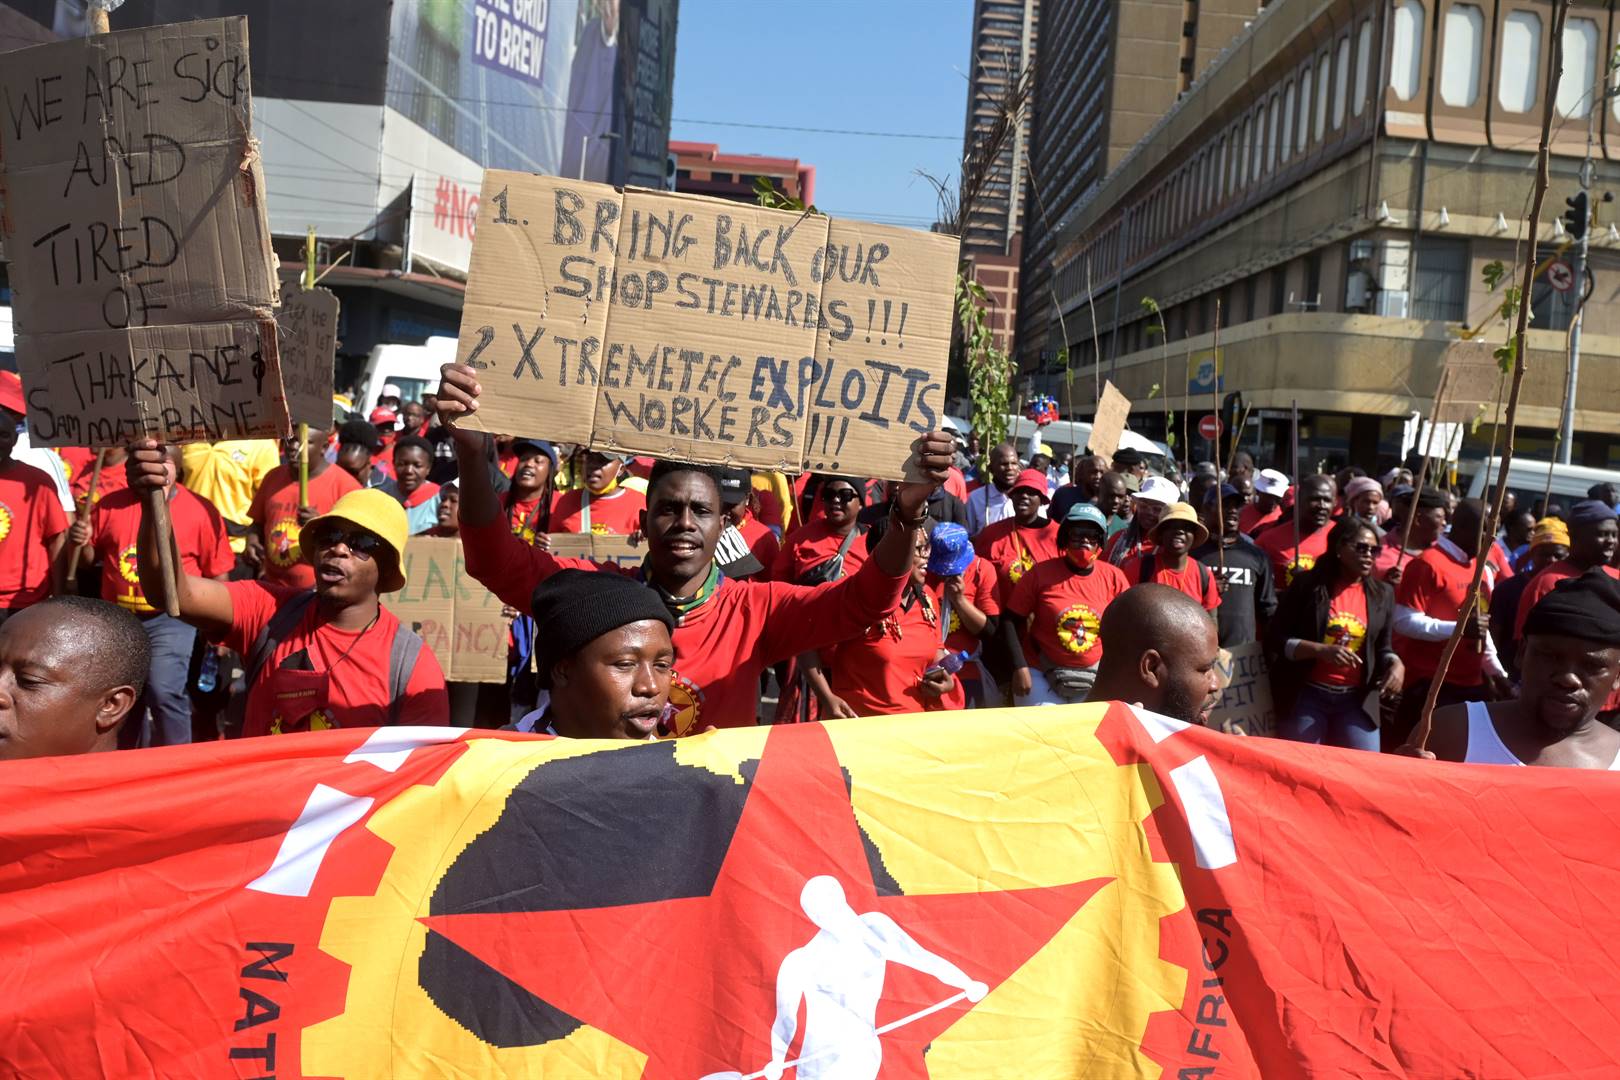 Numsa marched to the City of Tshwane's office on Friday